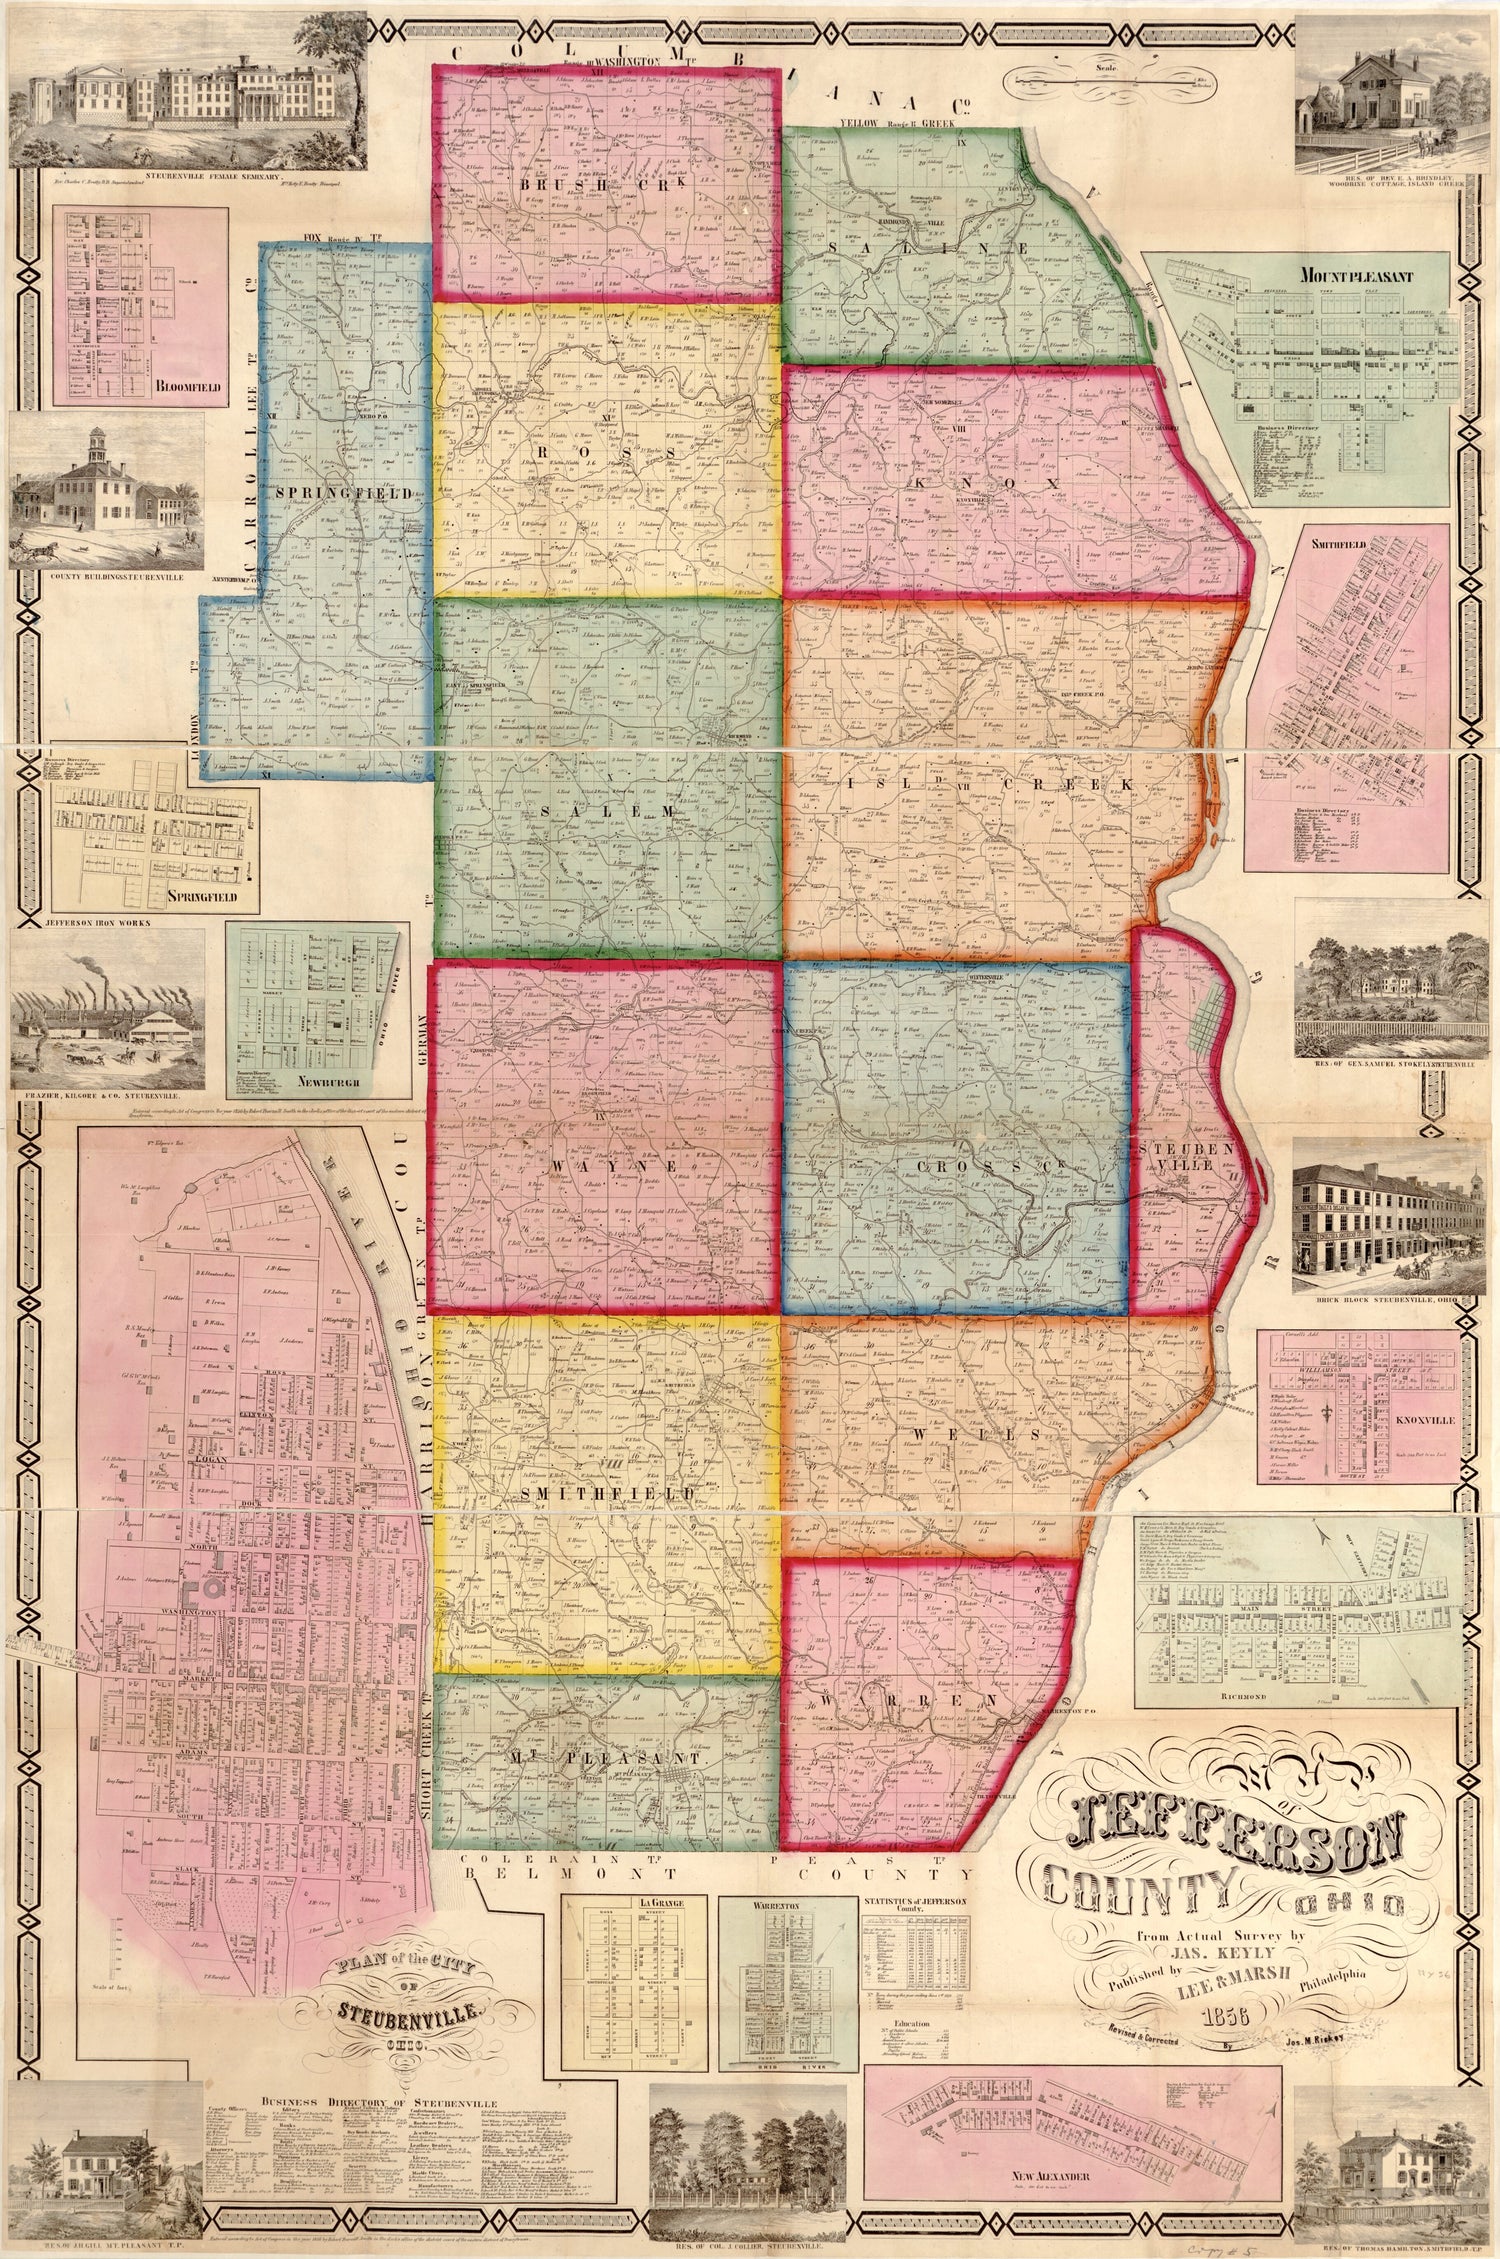 This old map of Map of Jefferson County, Ohio : from Actual Surveys from 1856 was created by Jas. (James) Keyly,  Lee &amp; Marsh, Jos. M. (Joseph M.) Rickey in 1856